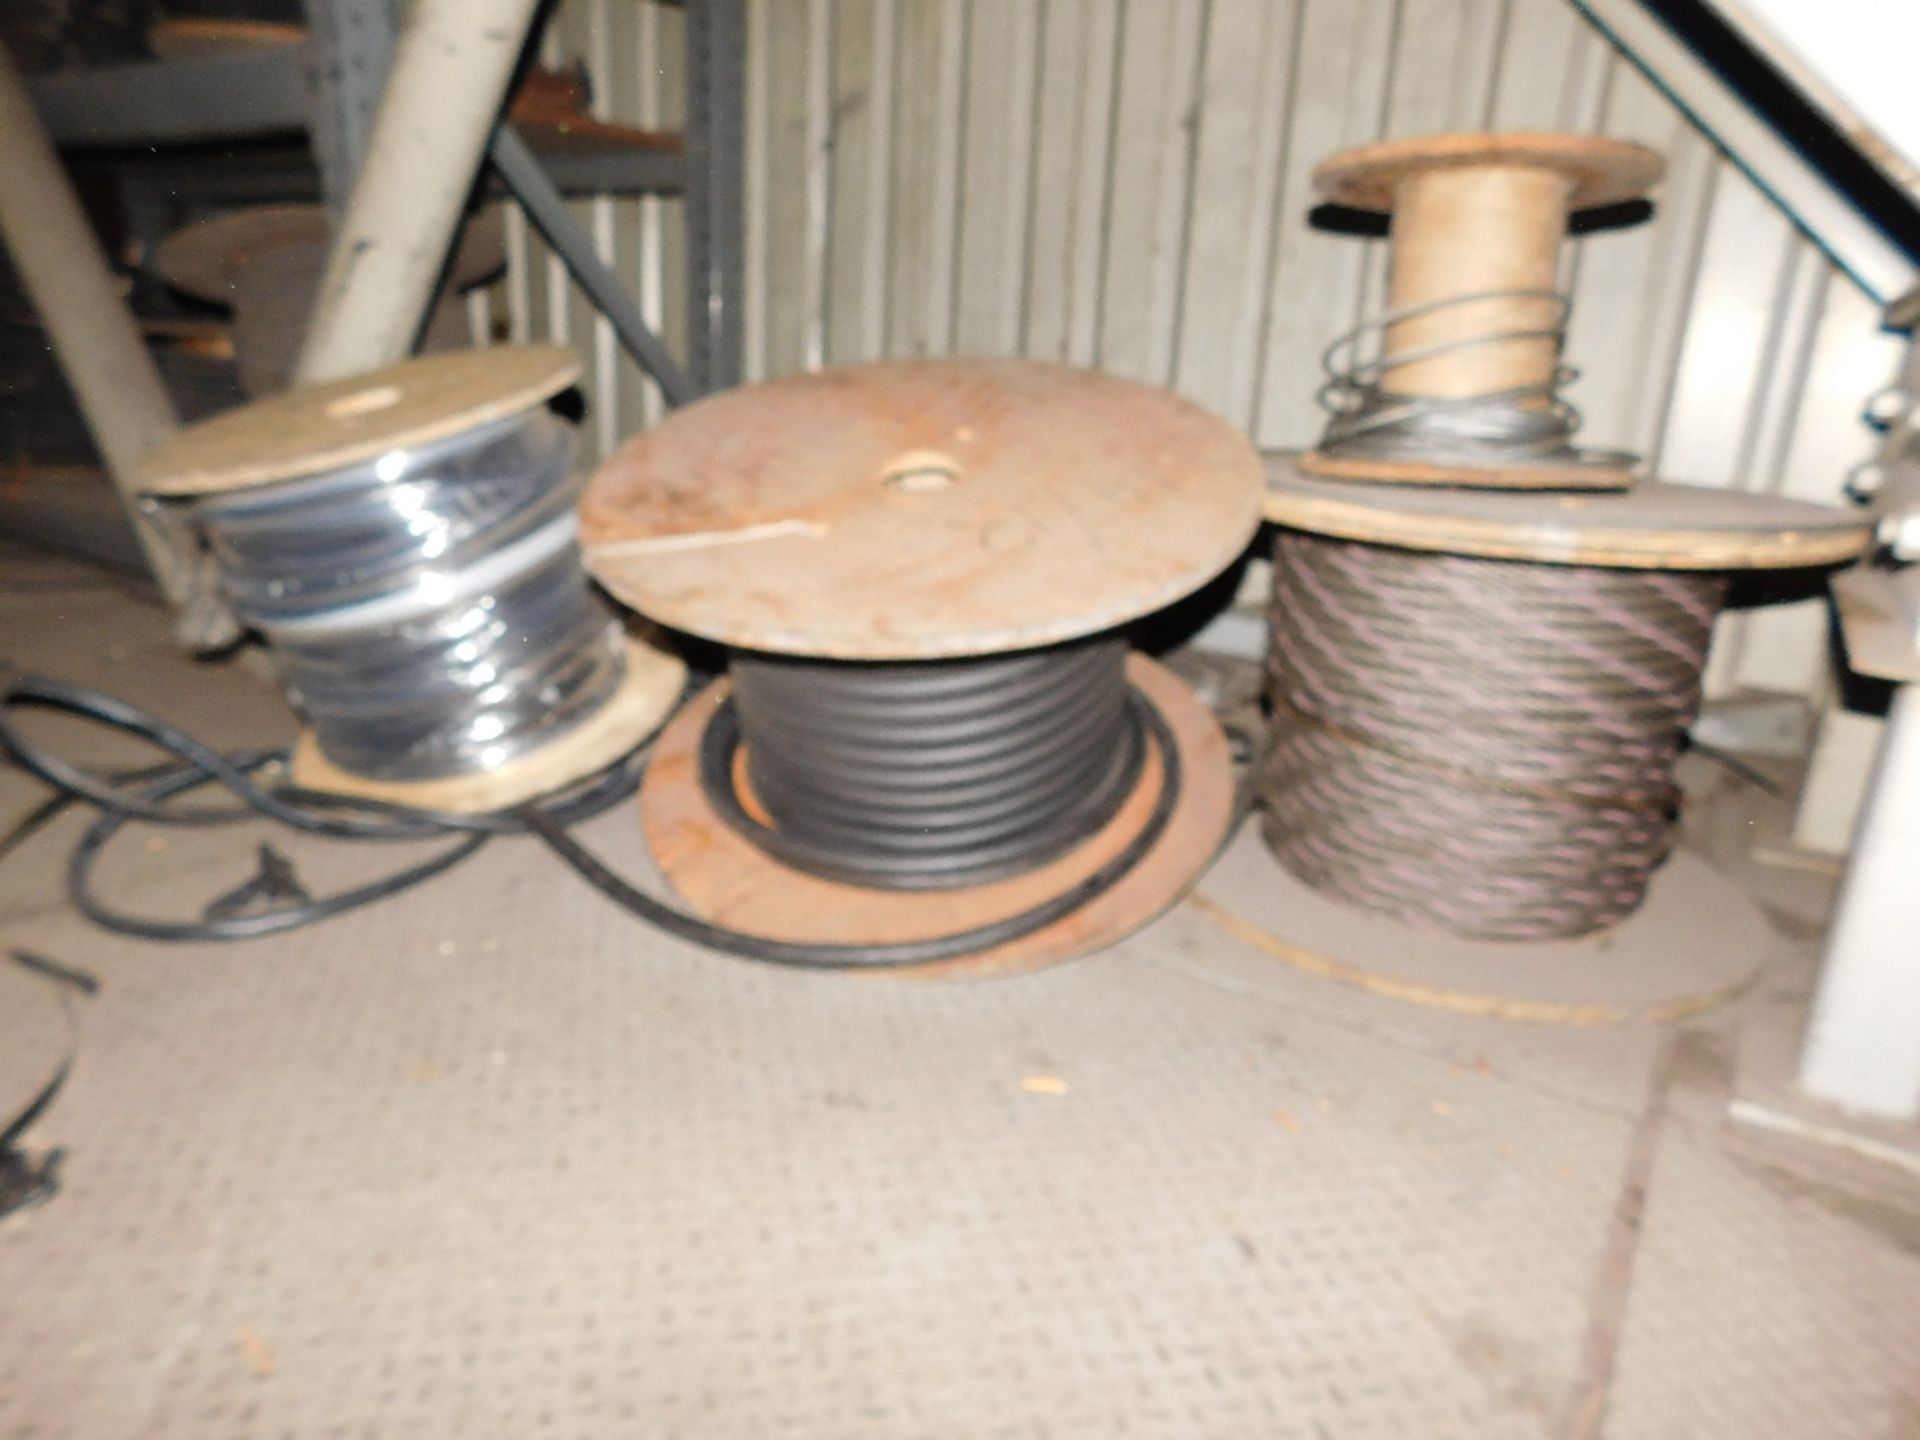 LOT - CONTENTS OF RACK ONLY: WIRE SPOOLS, PLUS SPOOLS ON FLOOR NEXT TO RACK (RACK NOT INCLUDED) - Image 2 of 3